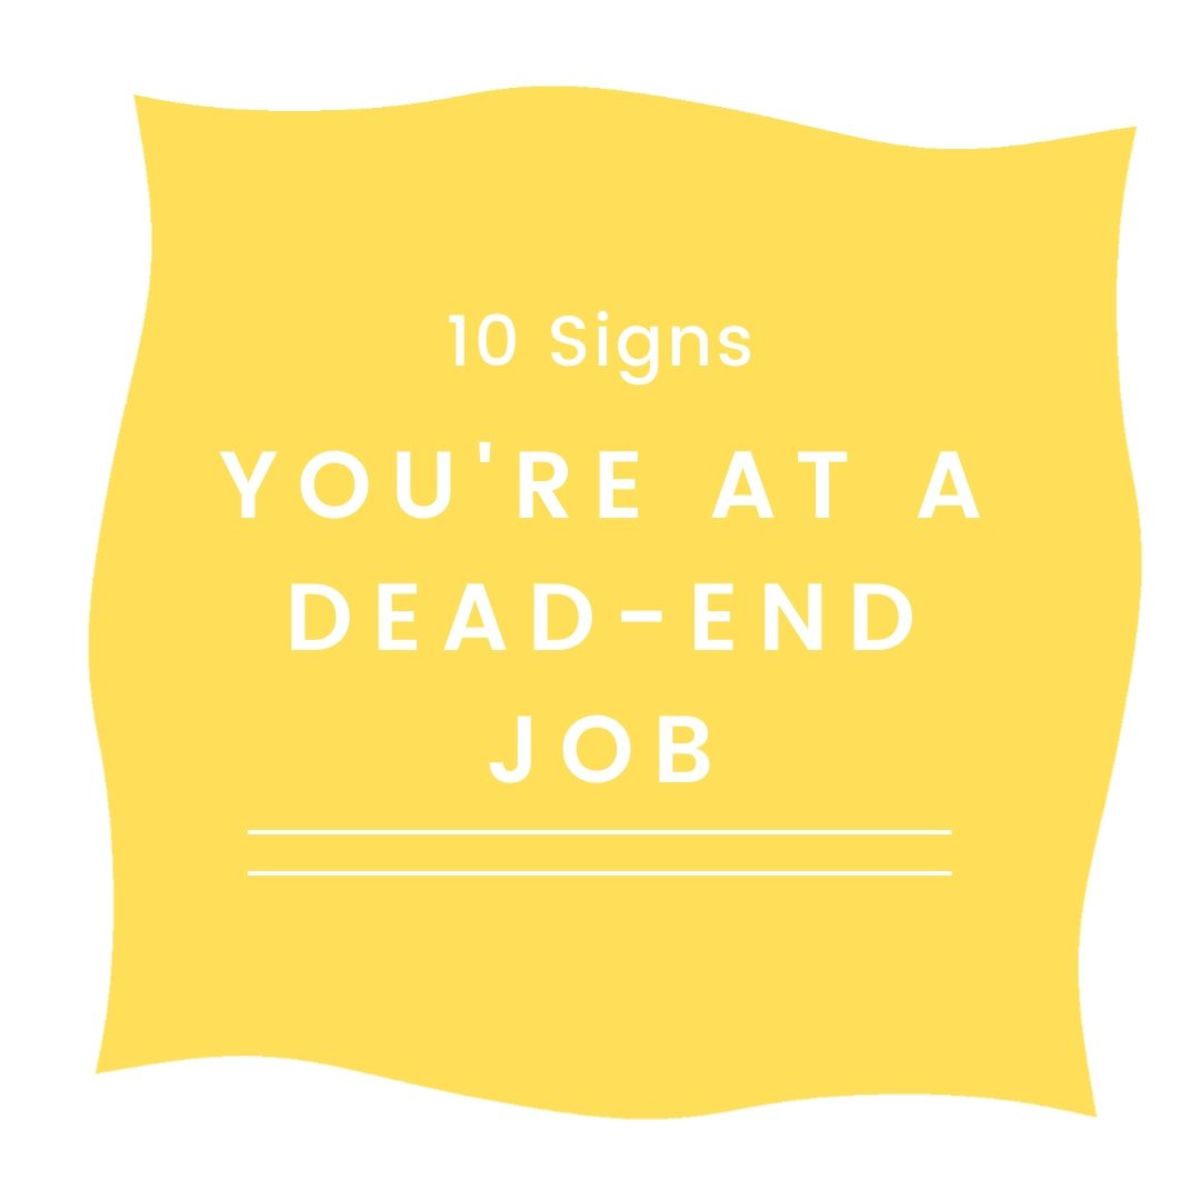 10 Signs You're at a Dead-End Job